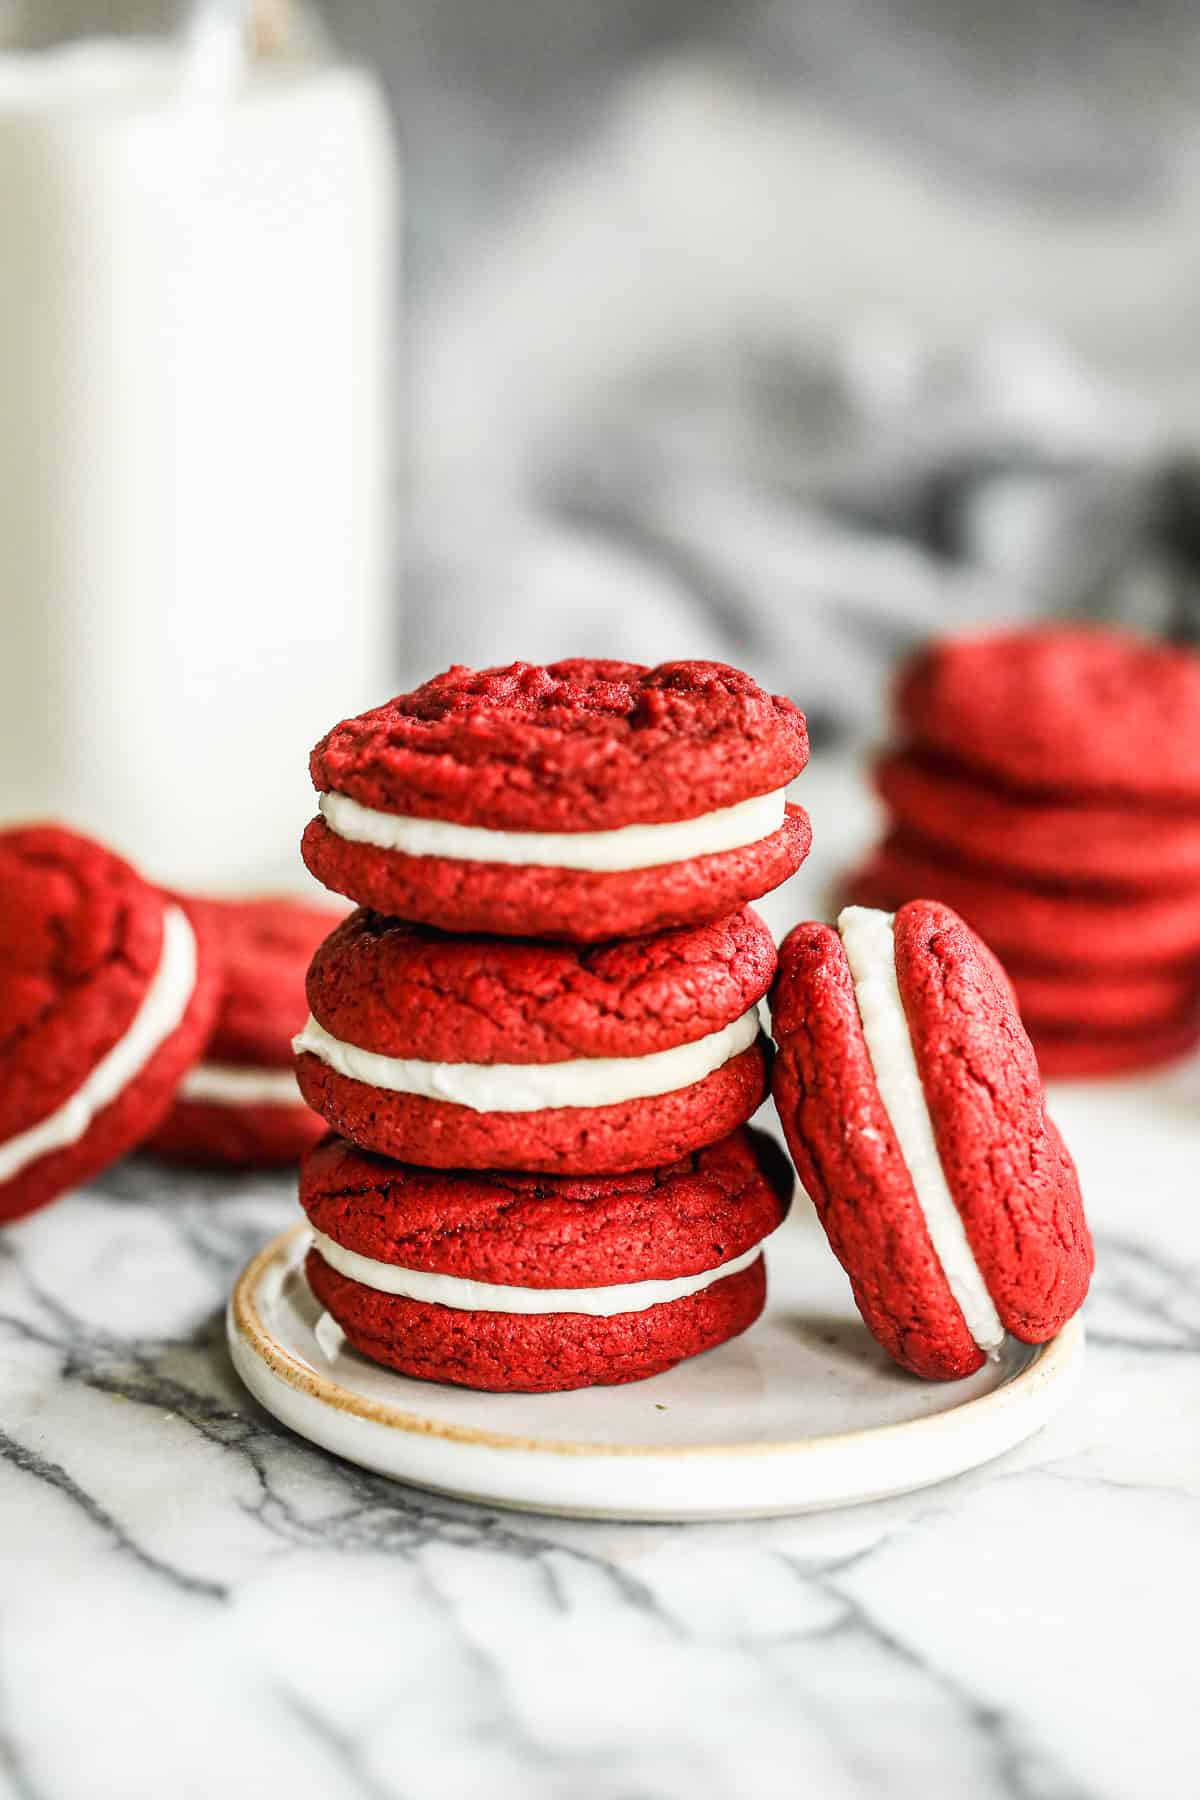 Three red velvet homemade Oreo cookies stacked on top of each other, with another one leaning against the stack.